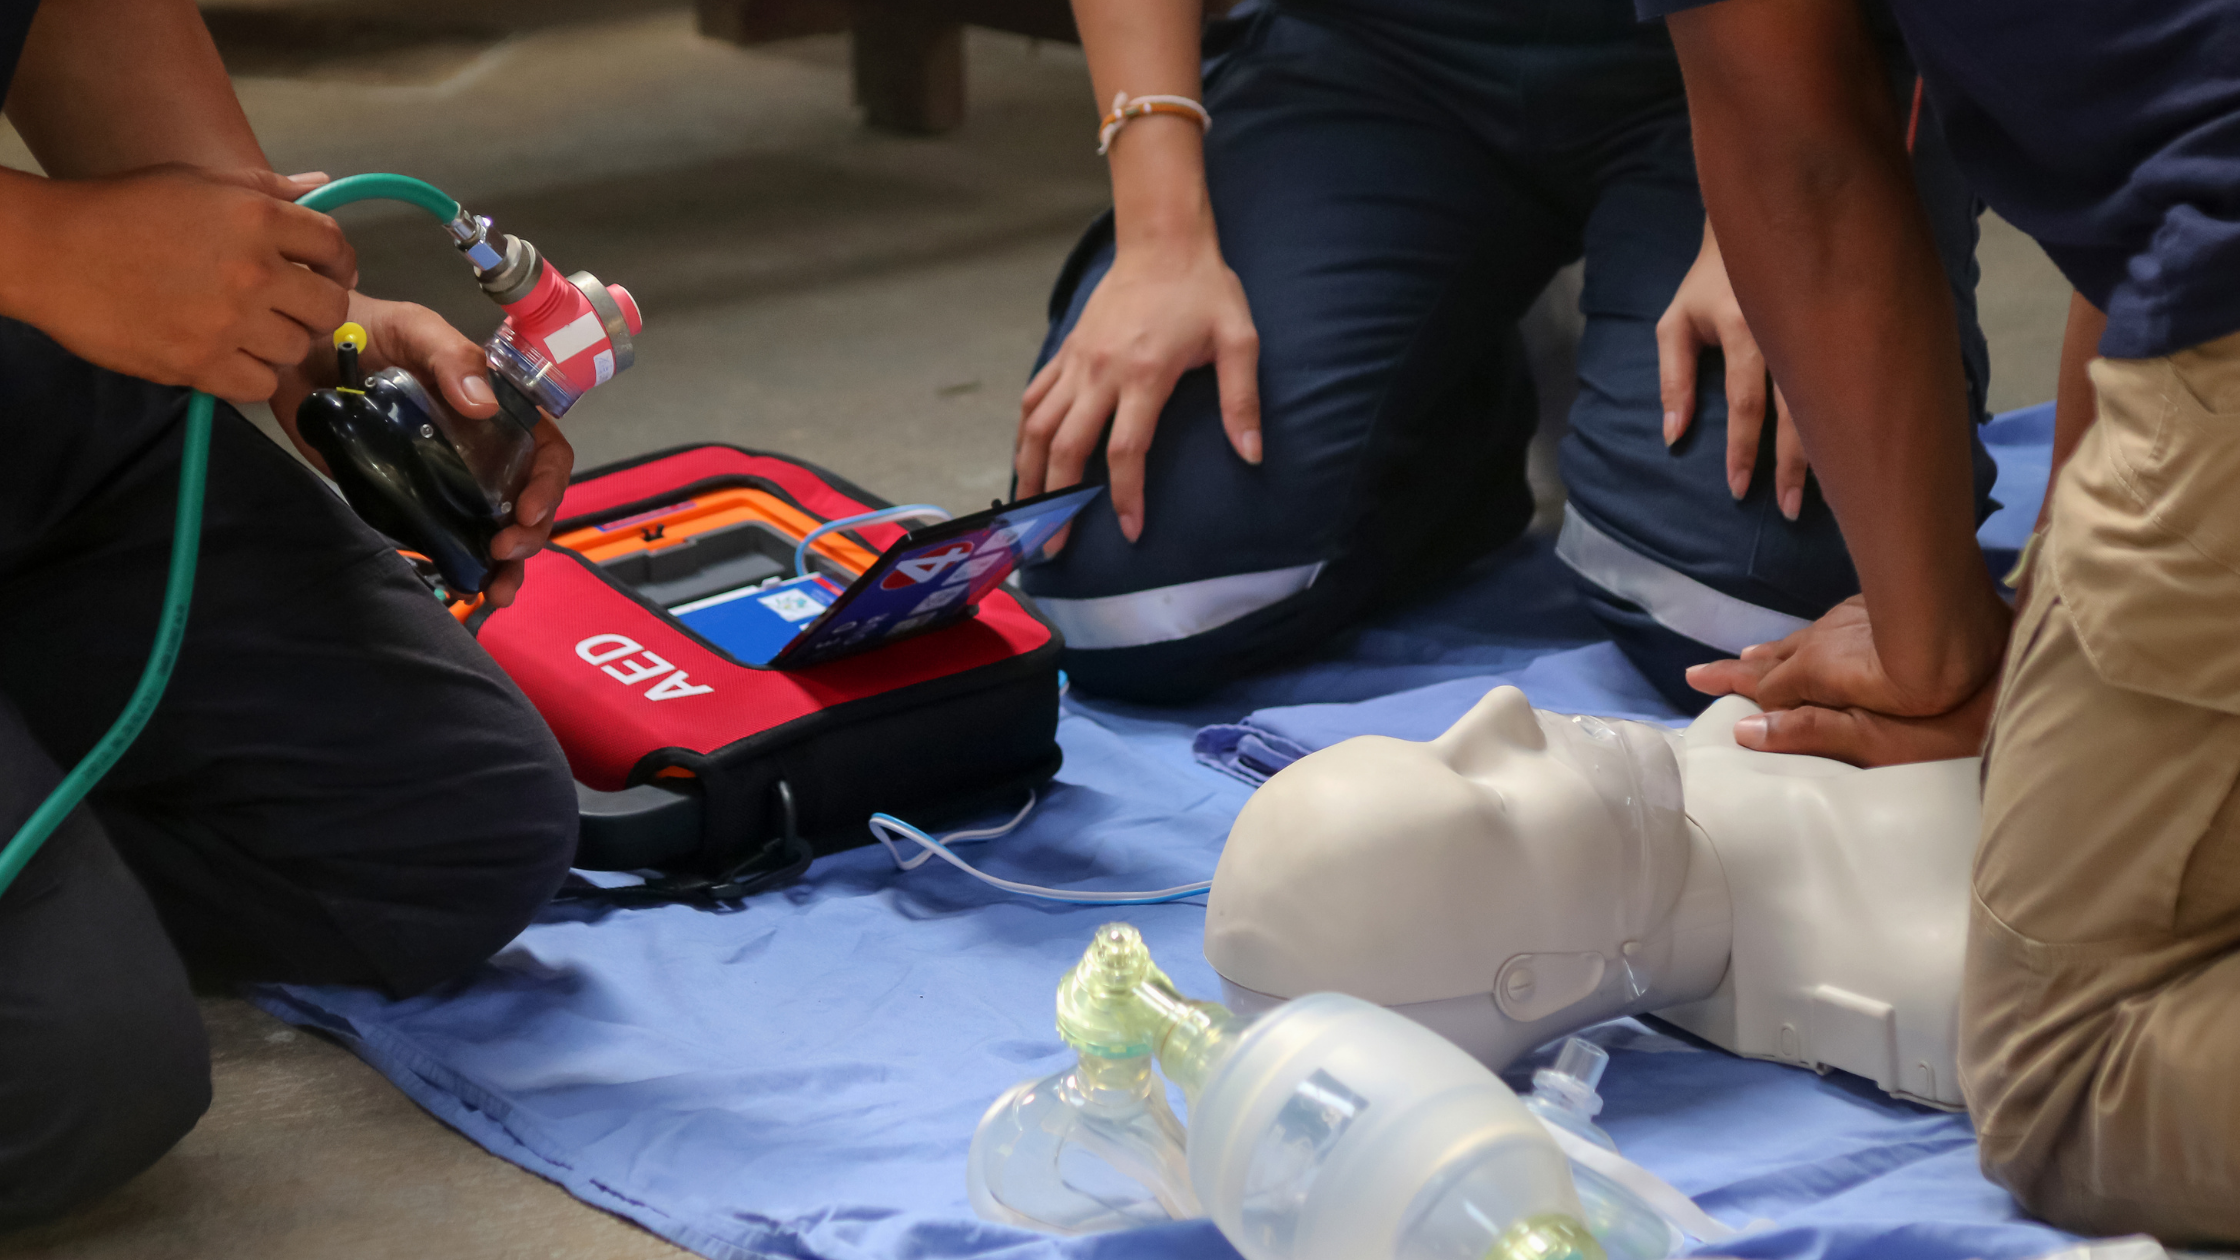 Burnaby Basic Life Support